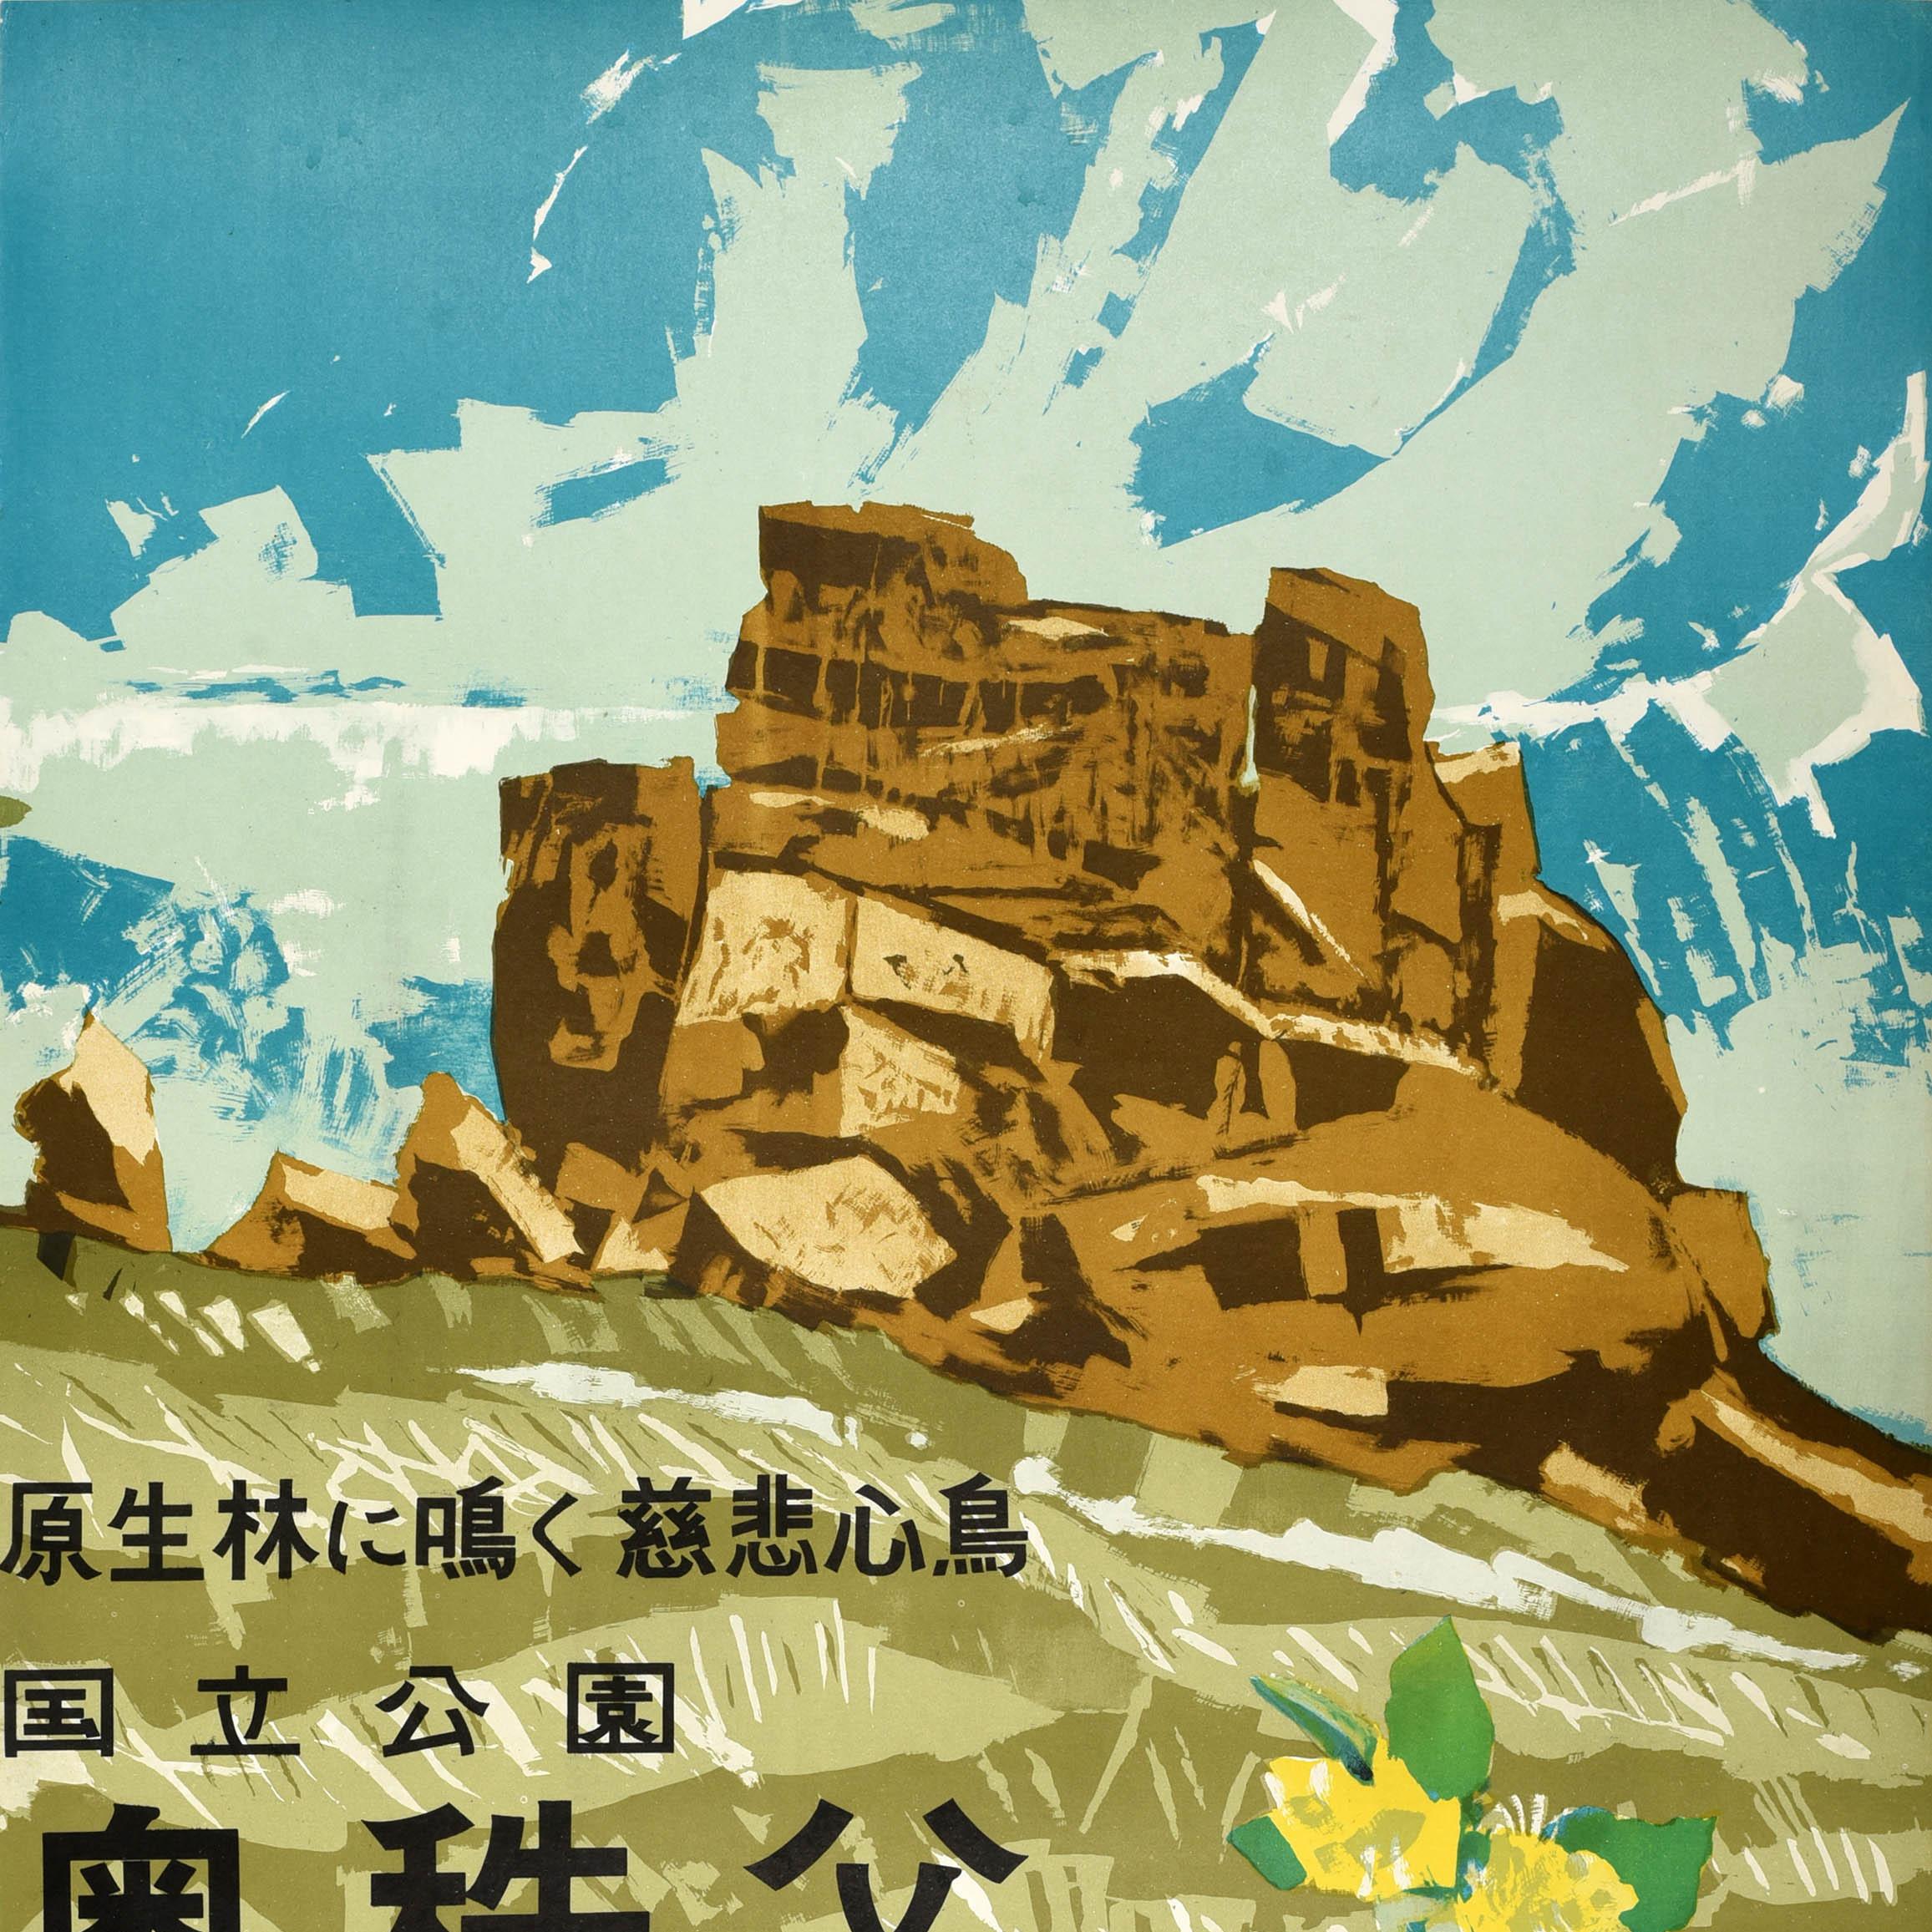 Original vintage travel poster for the Chichibu Tama Kai National Park in Japan issued by the Saitama Prefecture Chichibu Tourism Council featuring yellow flowers and a field of green grass leading up to a dramatic rock formation in front of the